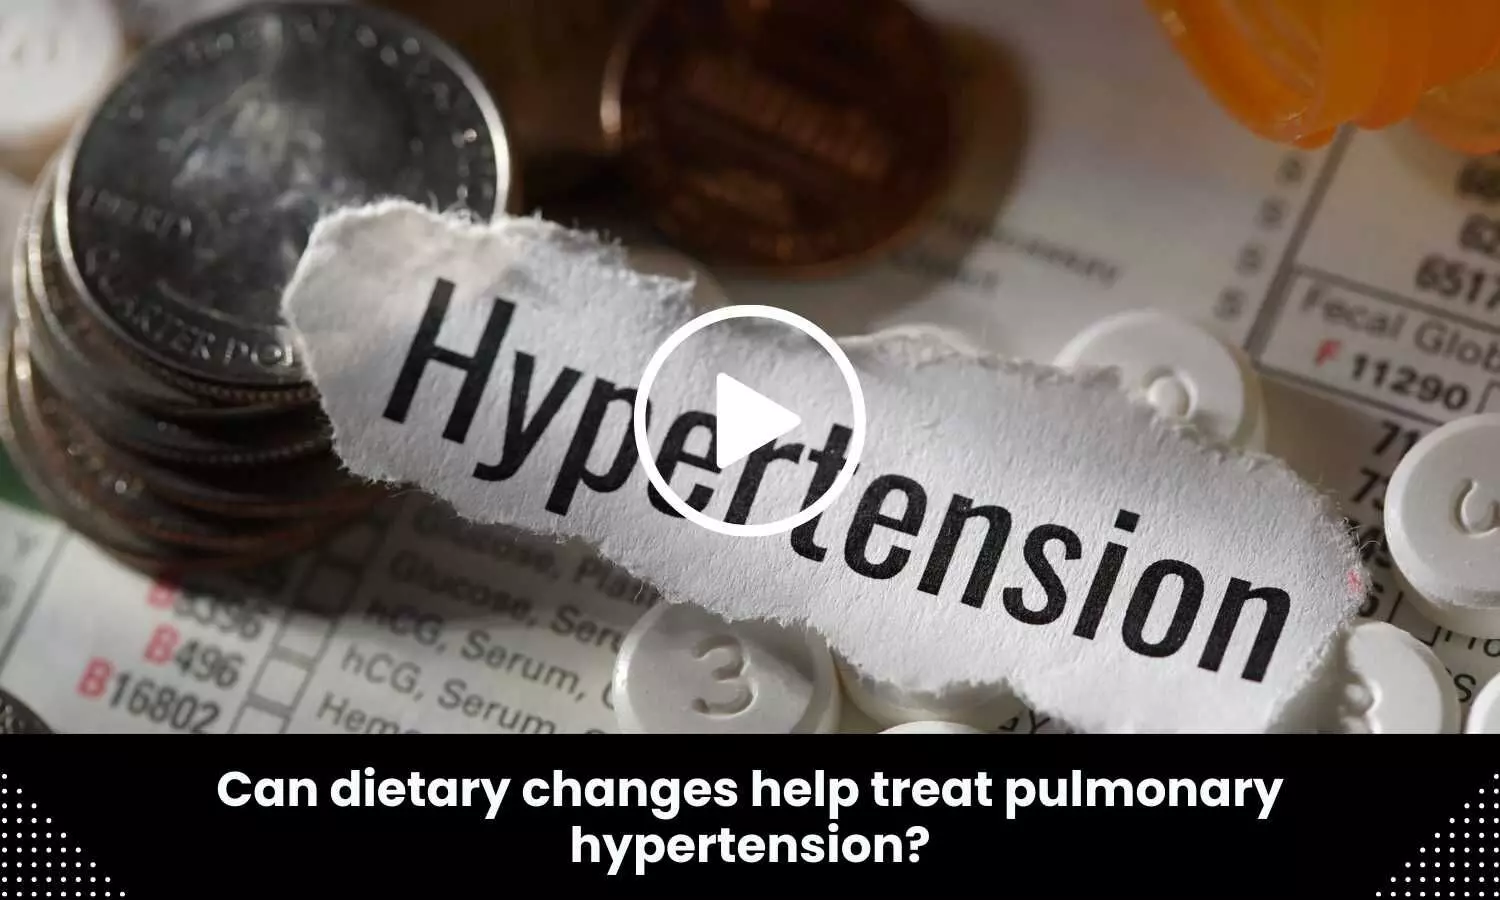 Can dietary changes help treat pulmonary hypertension?